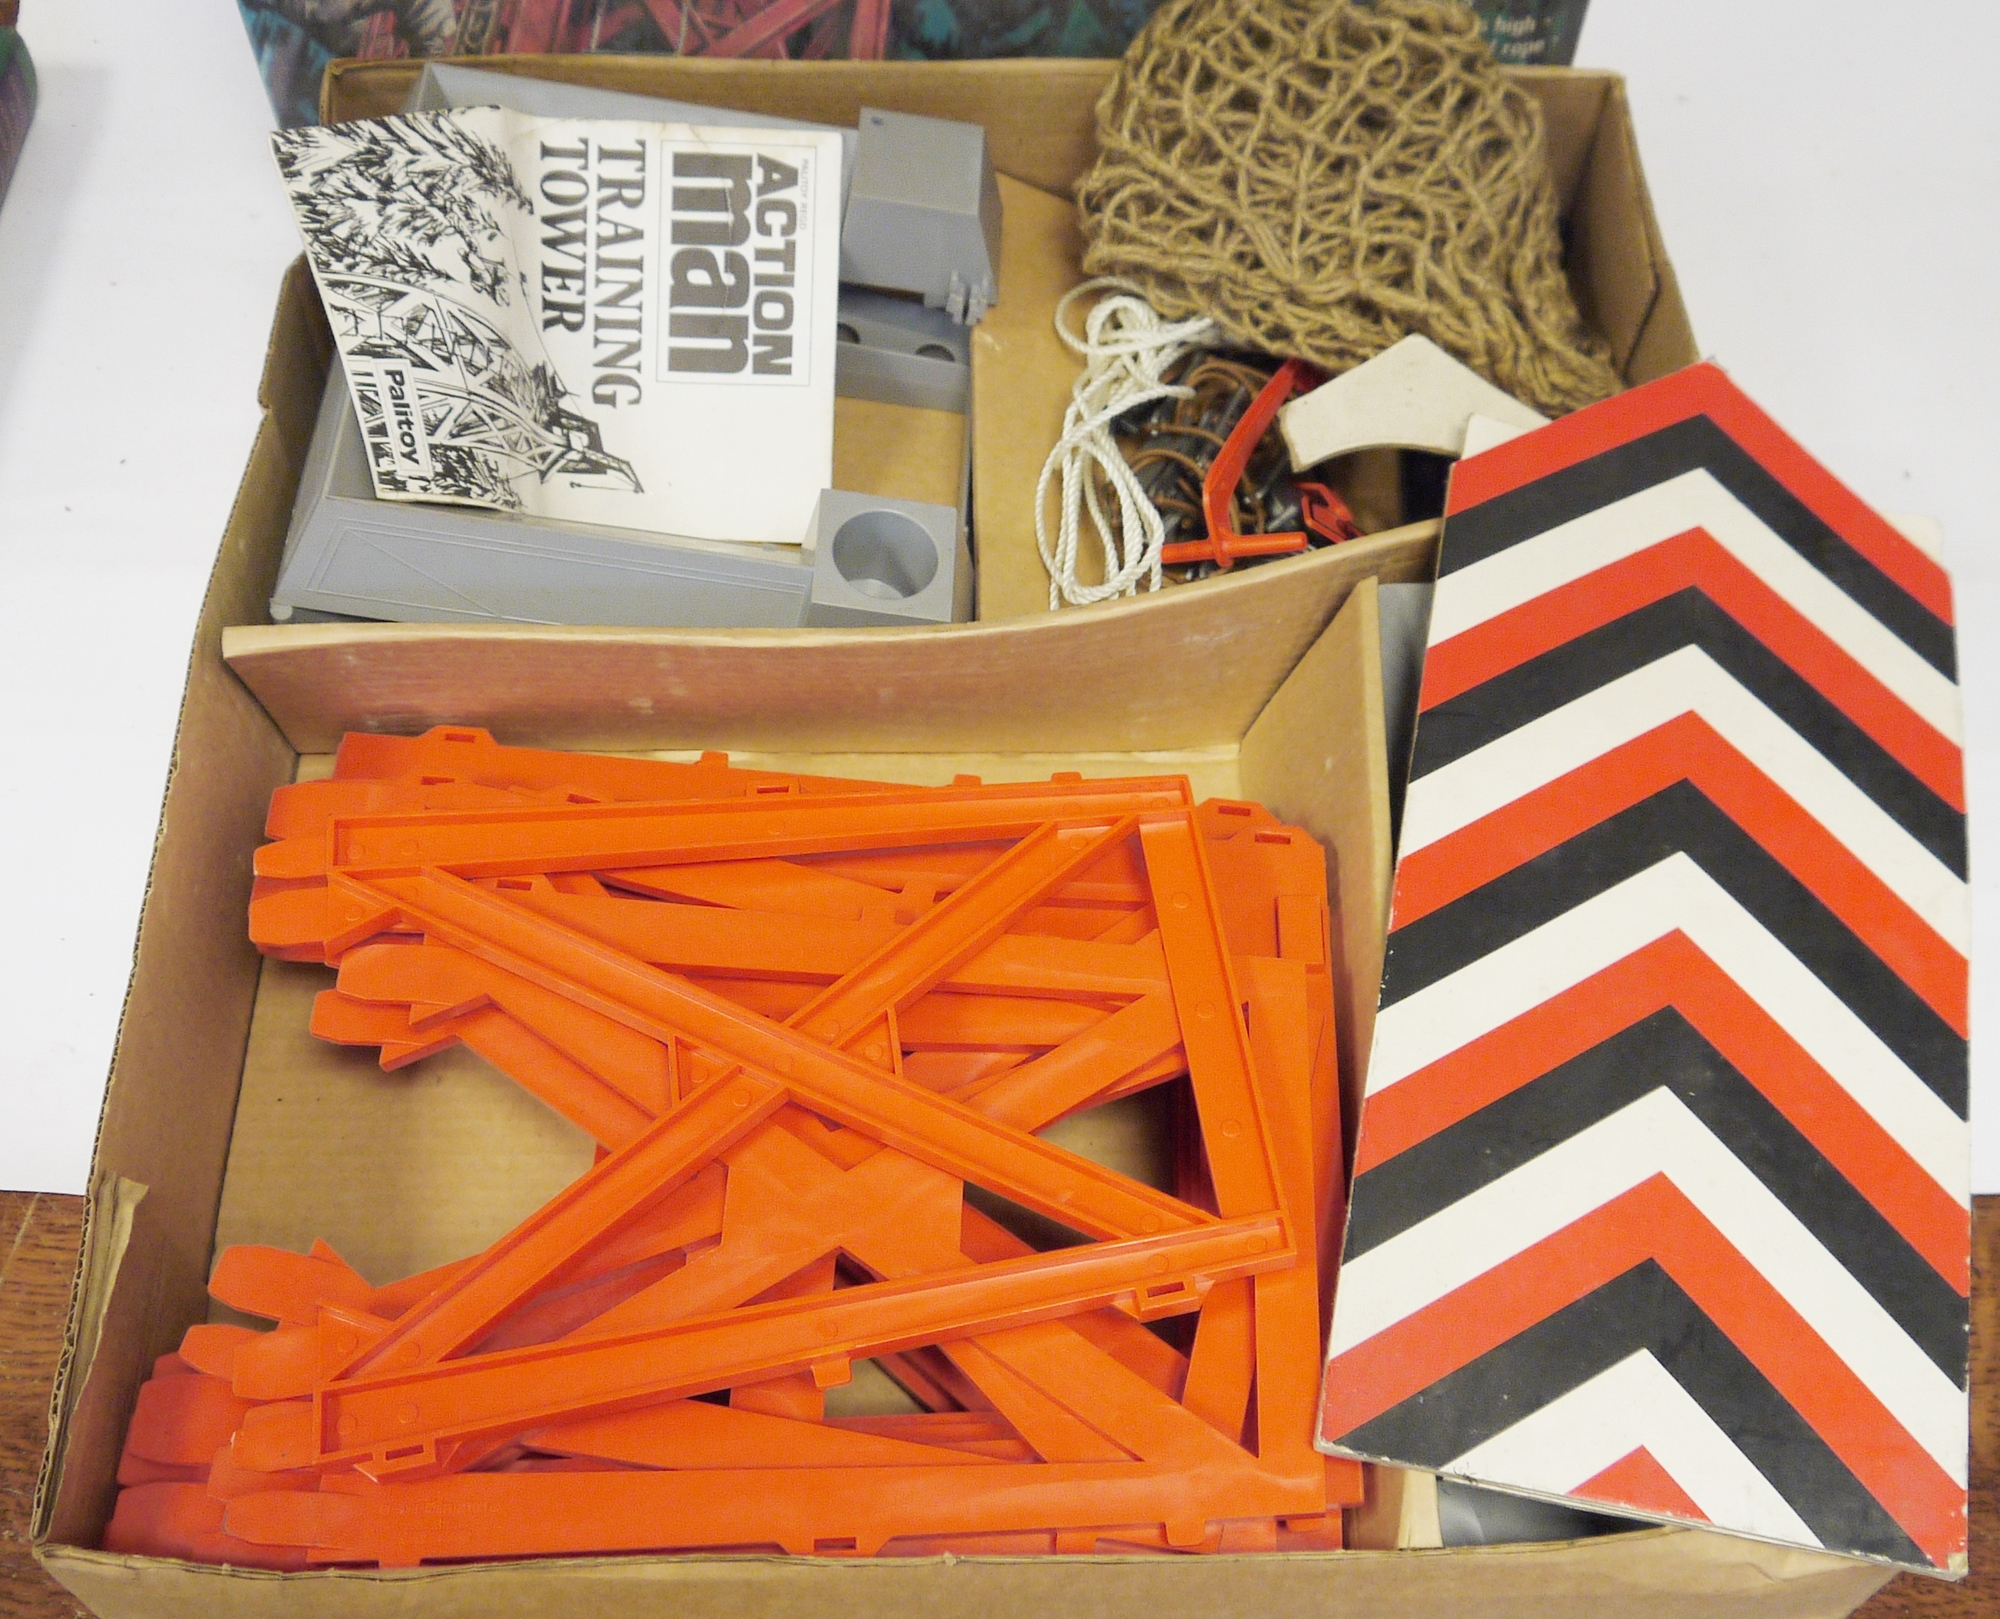 Palitoy Action Man Skyhawk 'the flying wing' in original box, together with a Palitoy Action Man - Image 3 of 3